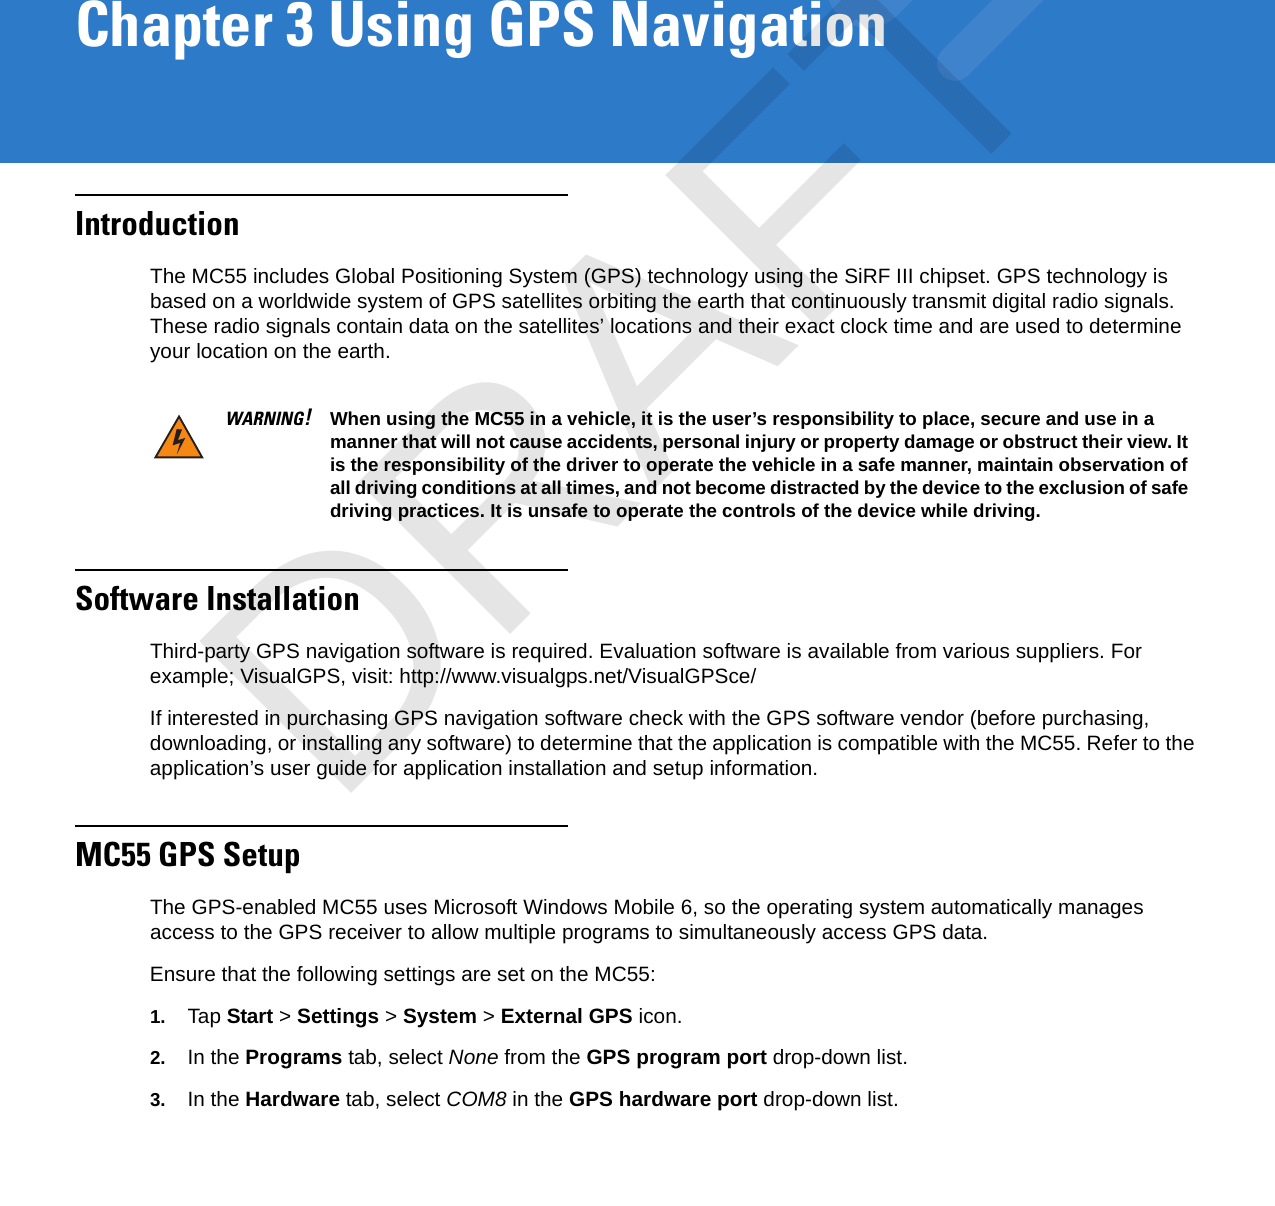 Chapter 3 Using GPS NavigationIntroductionThe MC55 includes Global Positioning System (GPS) technology using the SiRF III chipset. GPS technology is based on a worldwide system of GPS satellites orbiting the earth that continuously transmit digital radio signals. These radio signals contain data on the satellites’ locations and their exact clock time and are used to determine your location on the earth.Software InstallationThird-party GPS navigation software is required. Evaluation software is available from various suppliers. For example; VisualGPS, visit: http://www.visualgps.net/VisualGPSce/If interested in purchasing GPS navigation software check with the GPS software vendor (before purchasing, downloading, or installing any software) to determine that the application is compatible with the MC55. Refer to the application’s user guide for application installation and setup information.MC55 GPS SetupThe GPS-enabled MC55 uses Microsoft Windows Mobile 6, so the operating system automatically manages access to the GPS receiver to allow multiple programs to simultaneously access GPS data.Ensure that the following settings are set on the MC55:1. Tap Start &gt; Settings &gt; System &gt; External GPS icon.2. In the Programs tab, select None from the GPS program port drop-down list.3. In the Hardware tab, select COM8 in the GPS hardware port drop-down list.WARNING!When using the MC55 in a vehicle, it is the user’s responsibility to place, secure and use in a manner that will not cause accidents, personal injury or property damage or obstruct their view. It is the responsibility of the driver to operate the vehicle in a safe manner, maintain observation of all driving conditions at all times, and not become distracted by the device to the exclusion of safe driving practices. It is unsafe to operate the controls of the device while driving.DRAFT